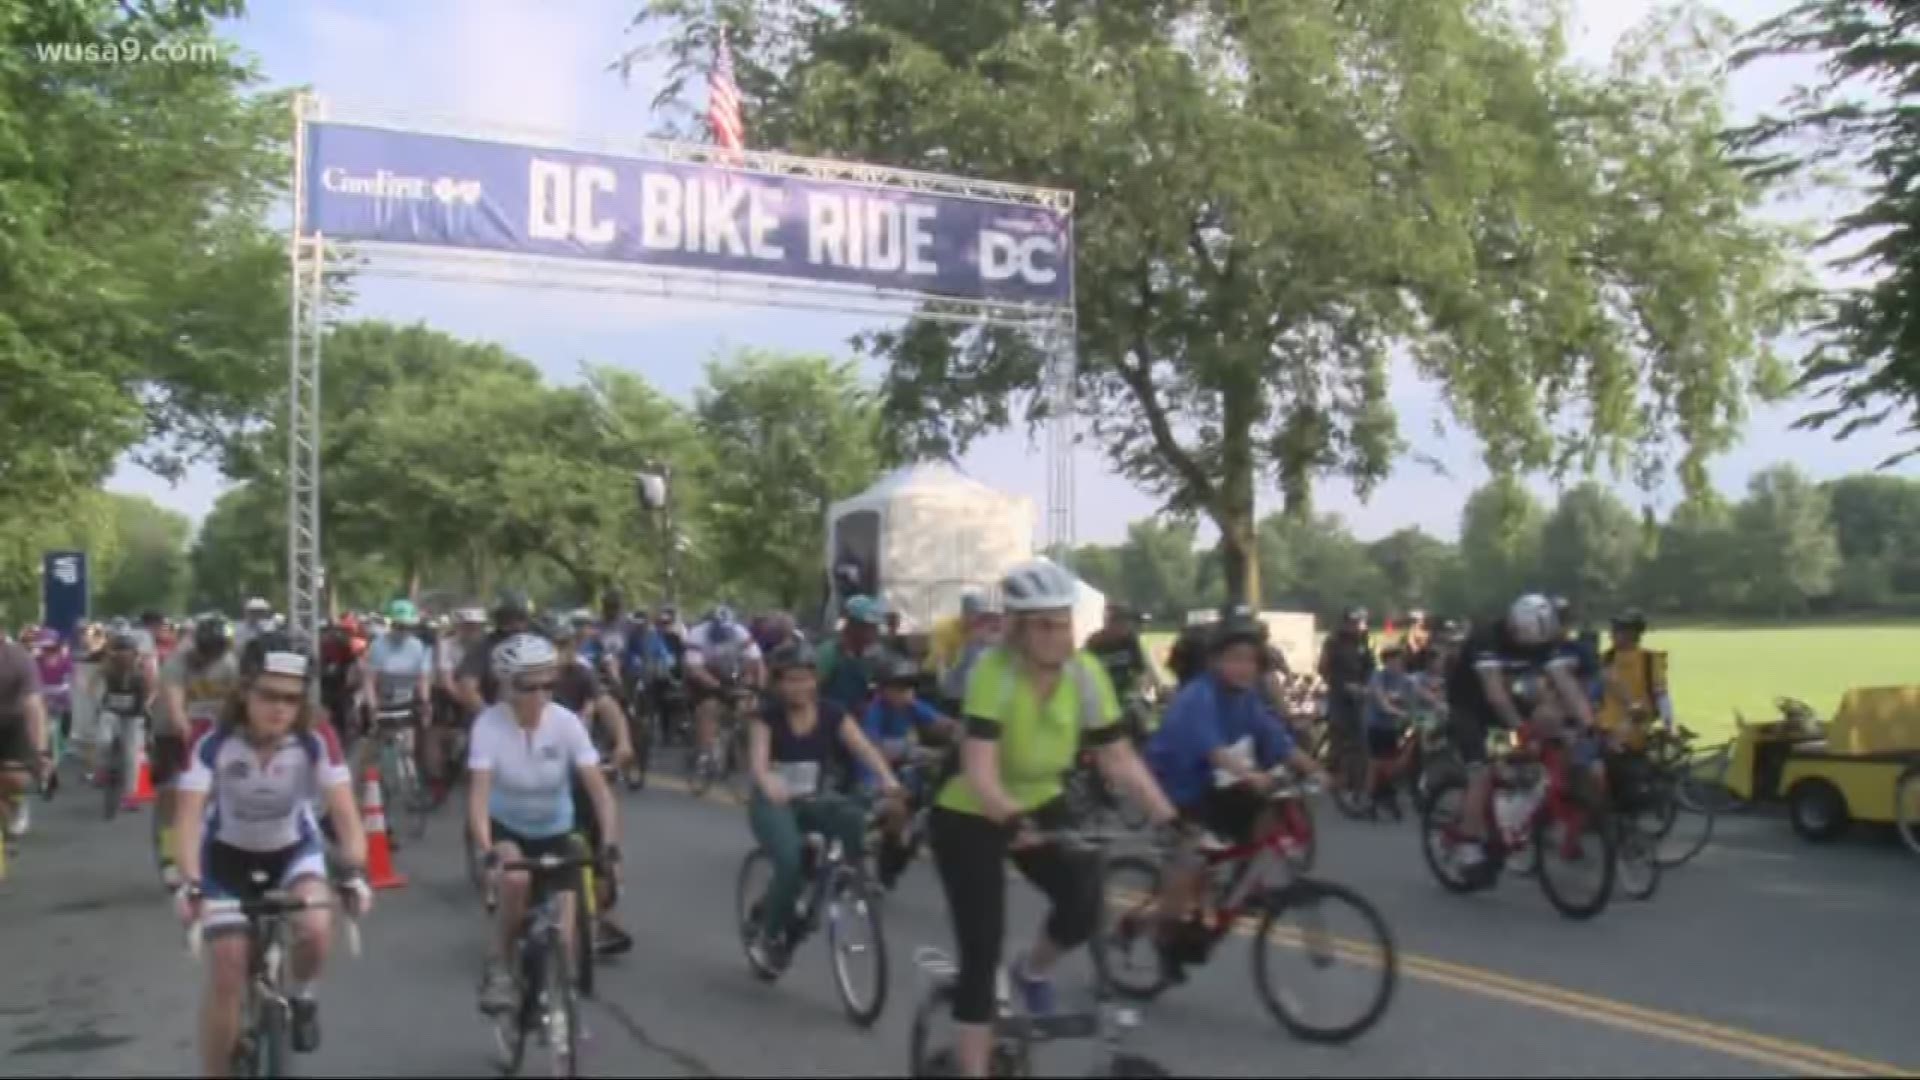 A rare chance today for cyclists to pedal around top DC attractions without worrying about cars. It's the fourth annual DC Bike Ride.